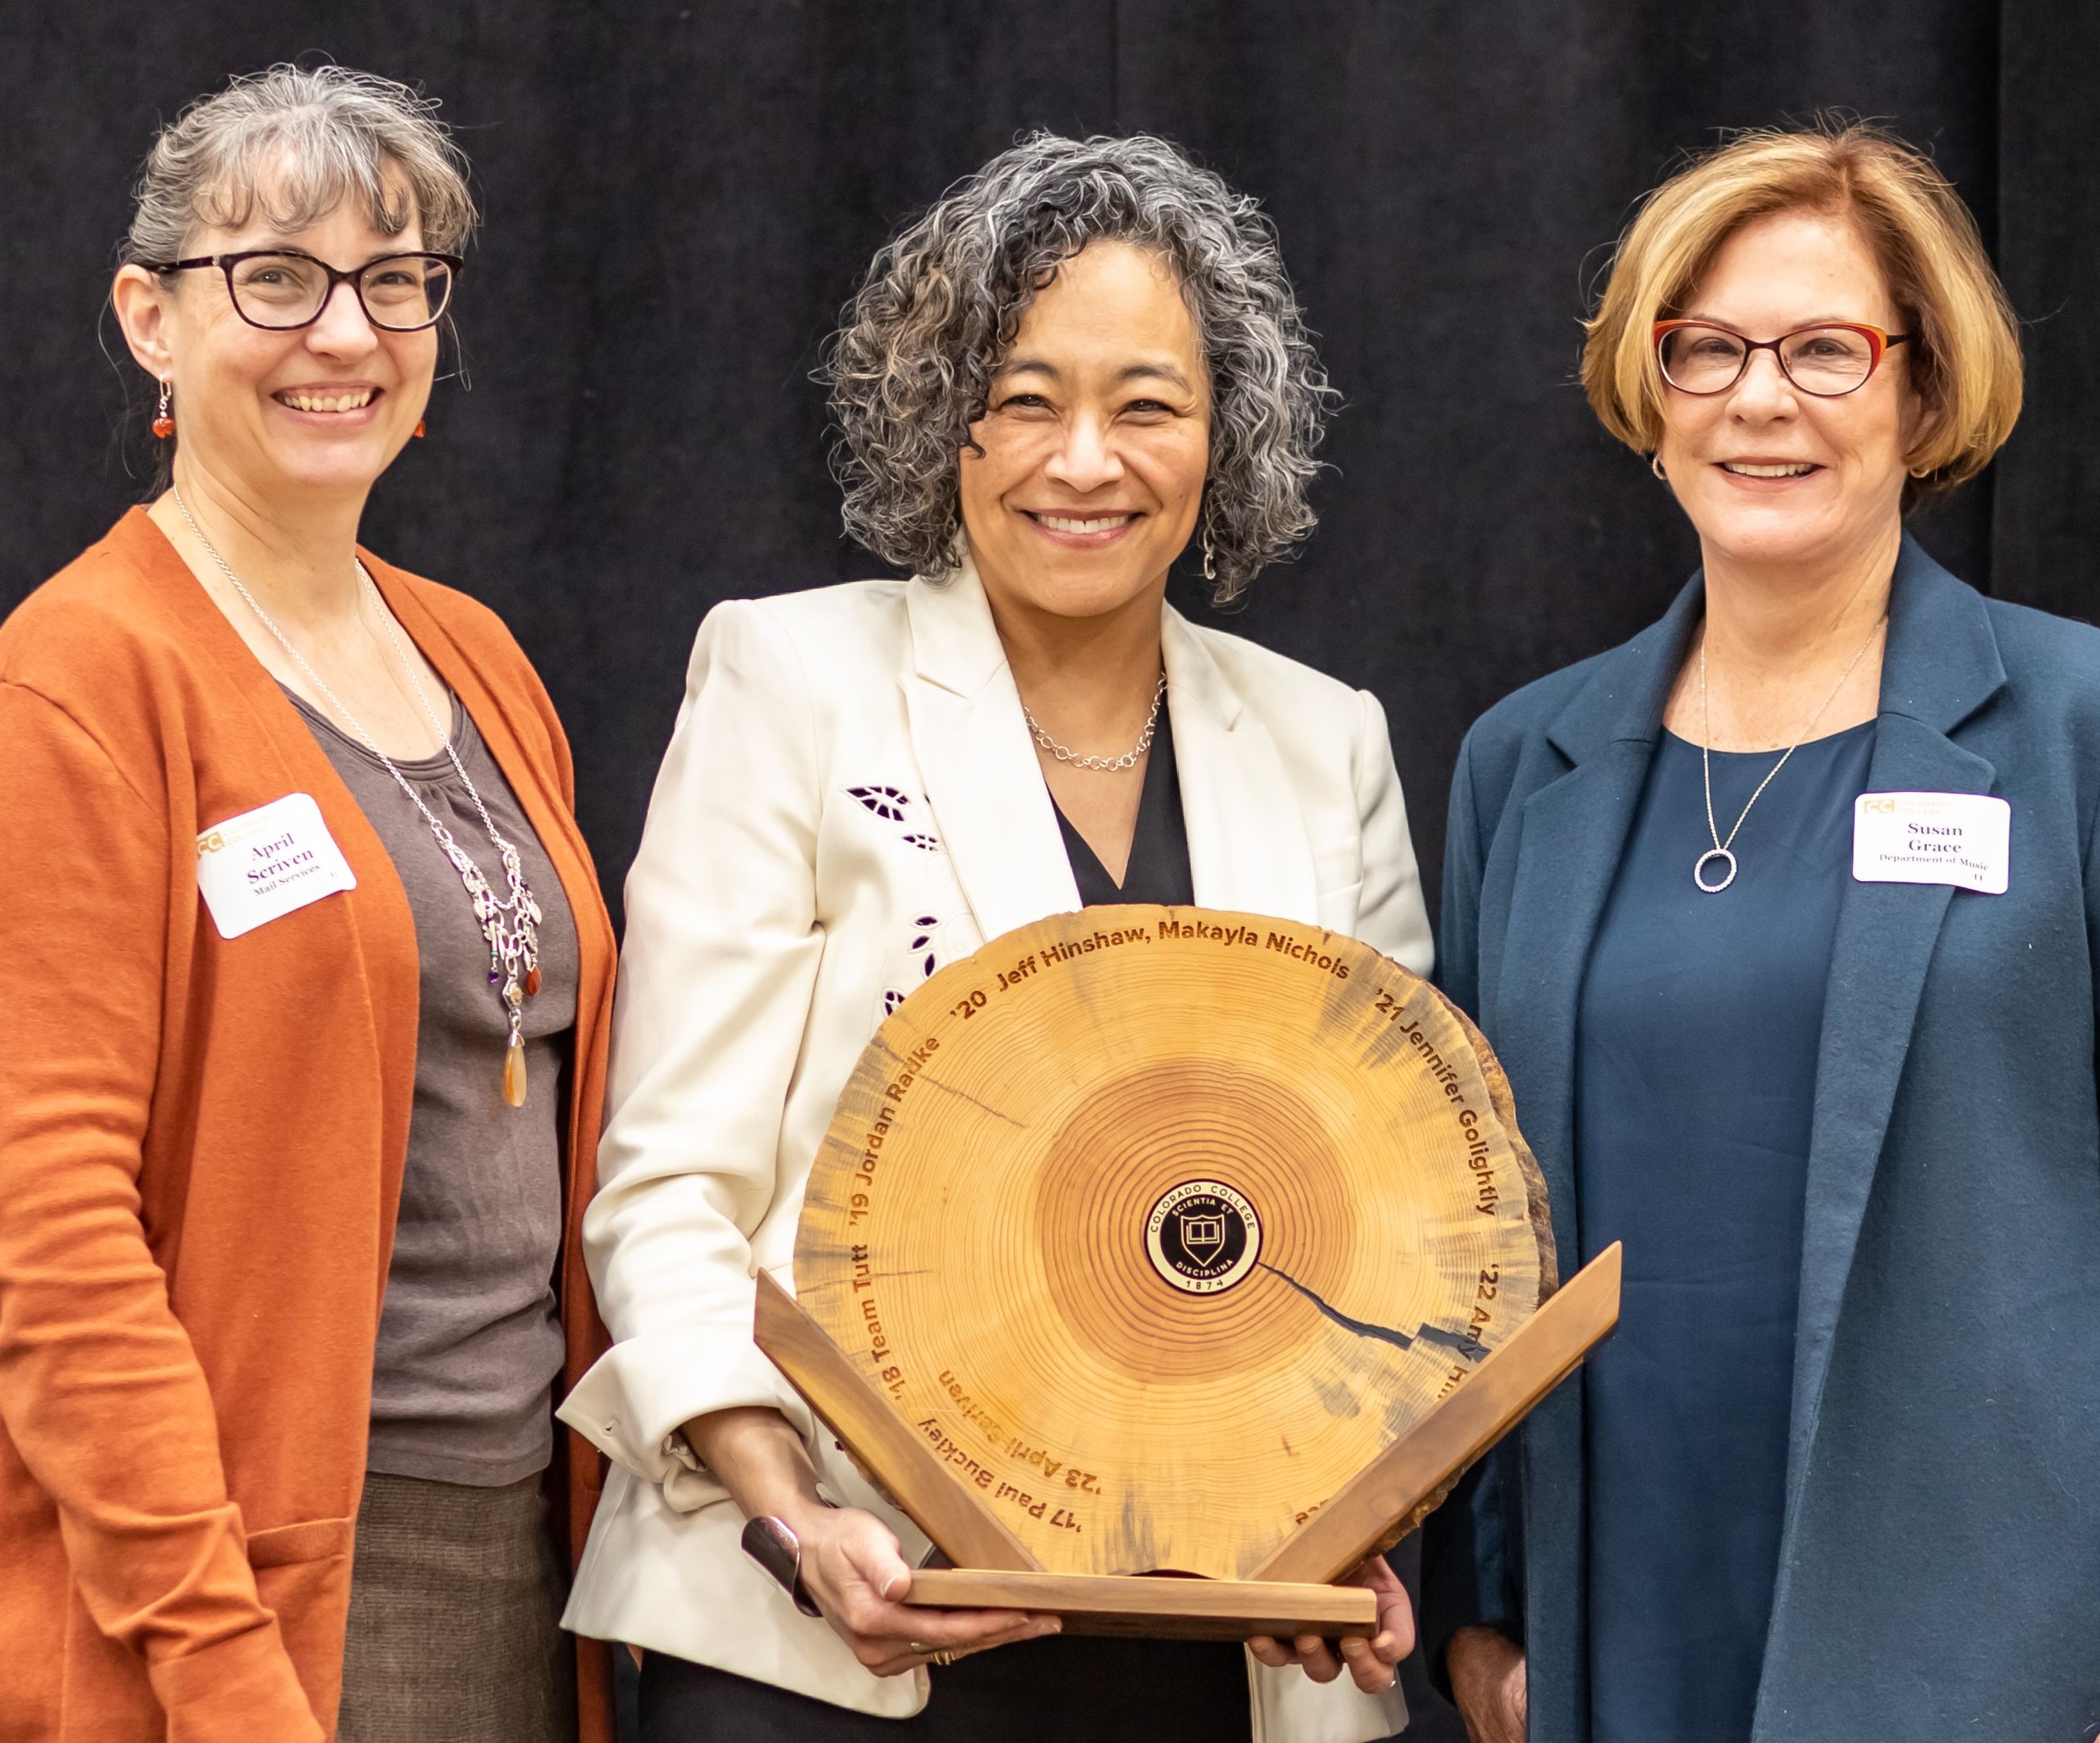 L. Song Richardson presents the Presidential Award for Collaboration and Community Building to Susan Grace, right, and April Scriven, who tied for the honor. Presidential Award trophies are made from reclaimed wood from trees taken down in the renovation and expansion of Tutt Library. Grace will have her name engraved on the wood.